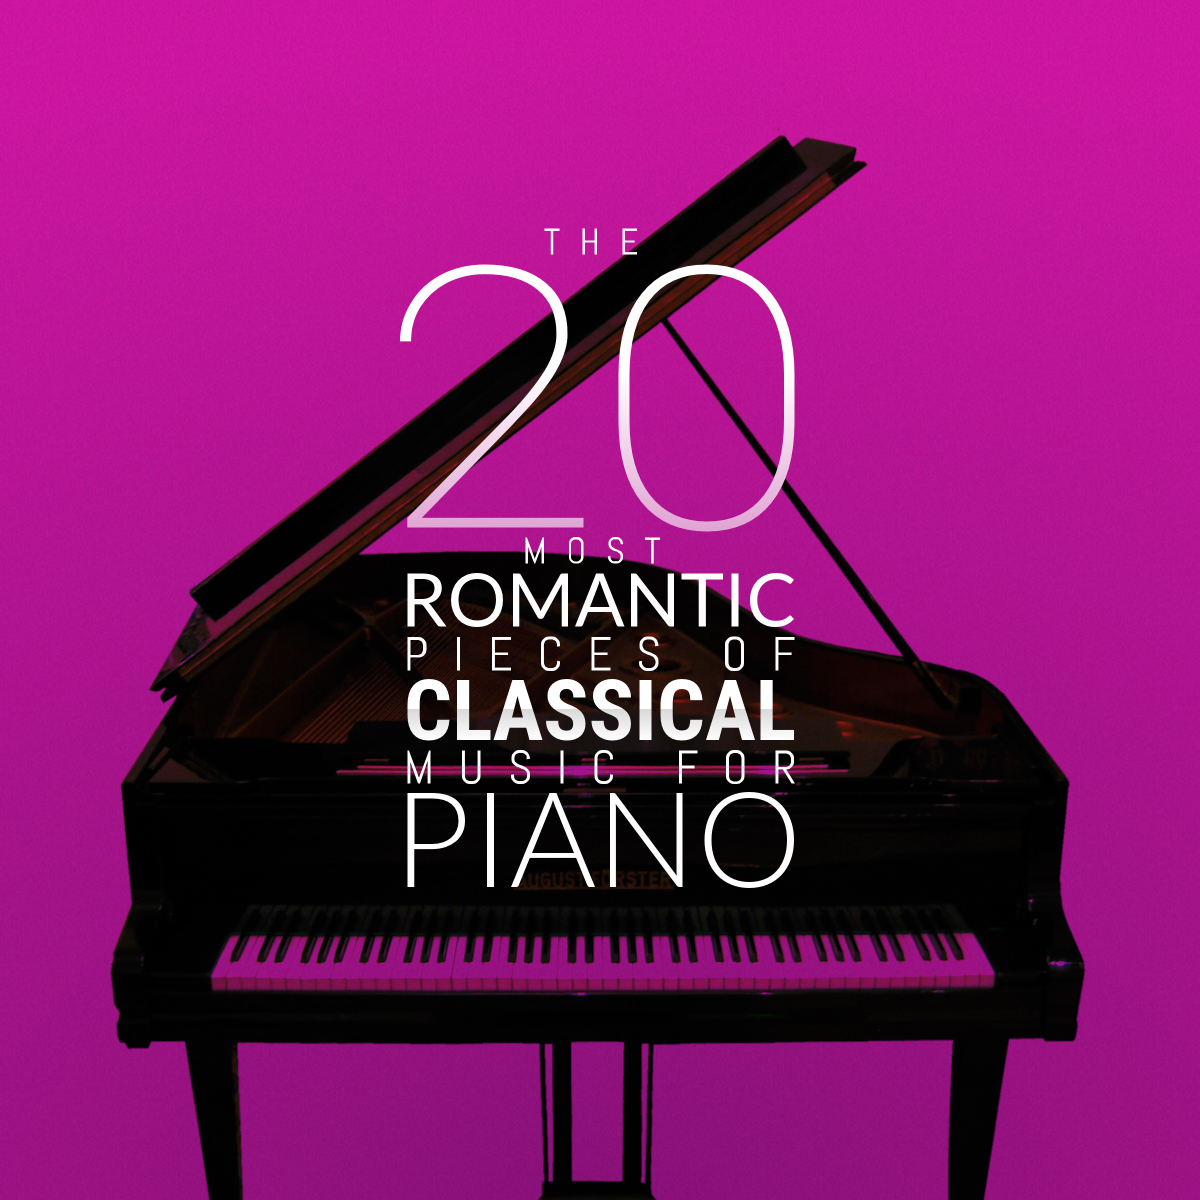 The 20 Most Romantic Pieces of Classical Music for Piano